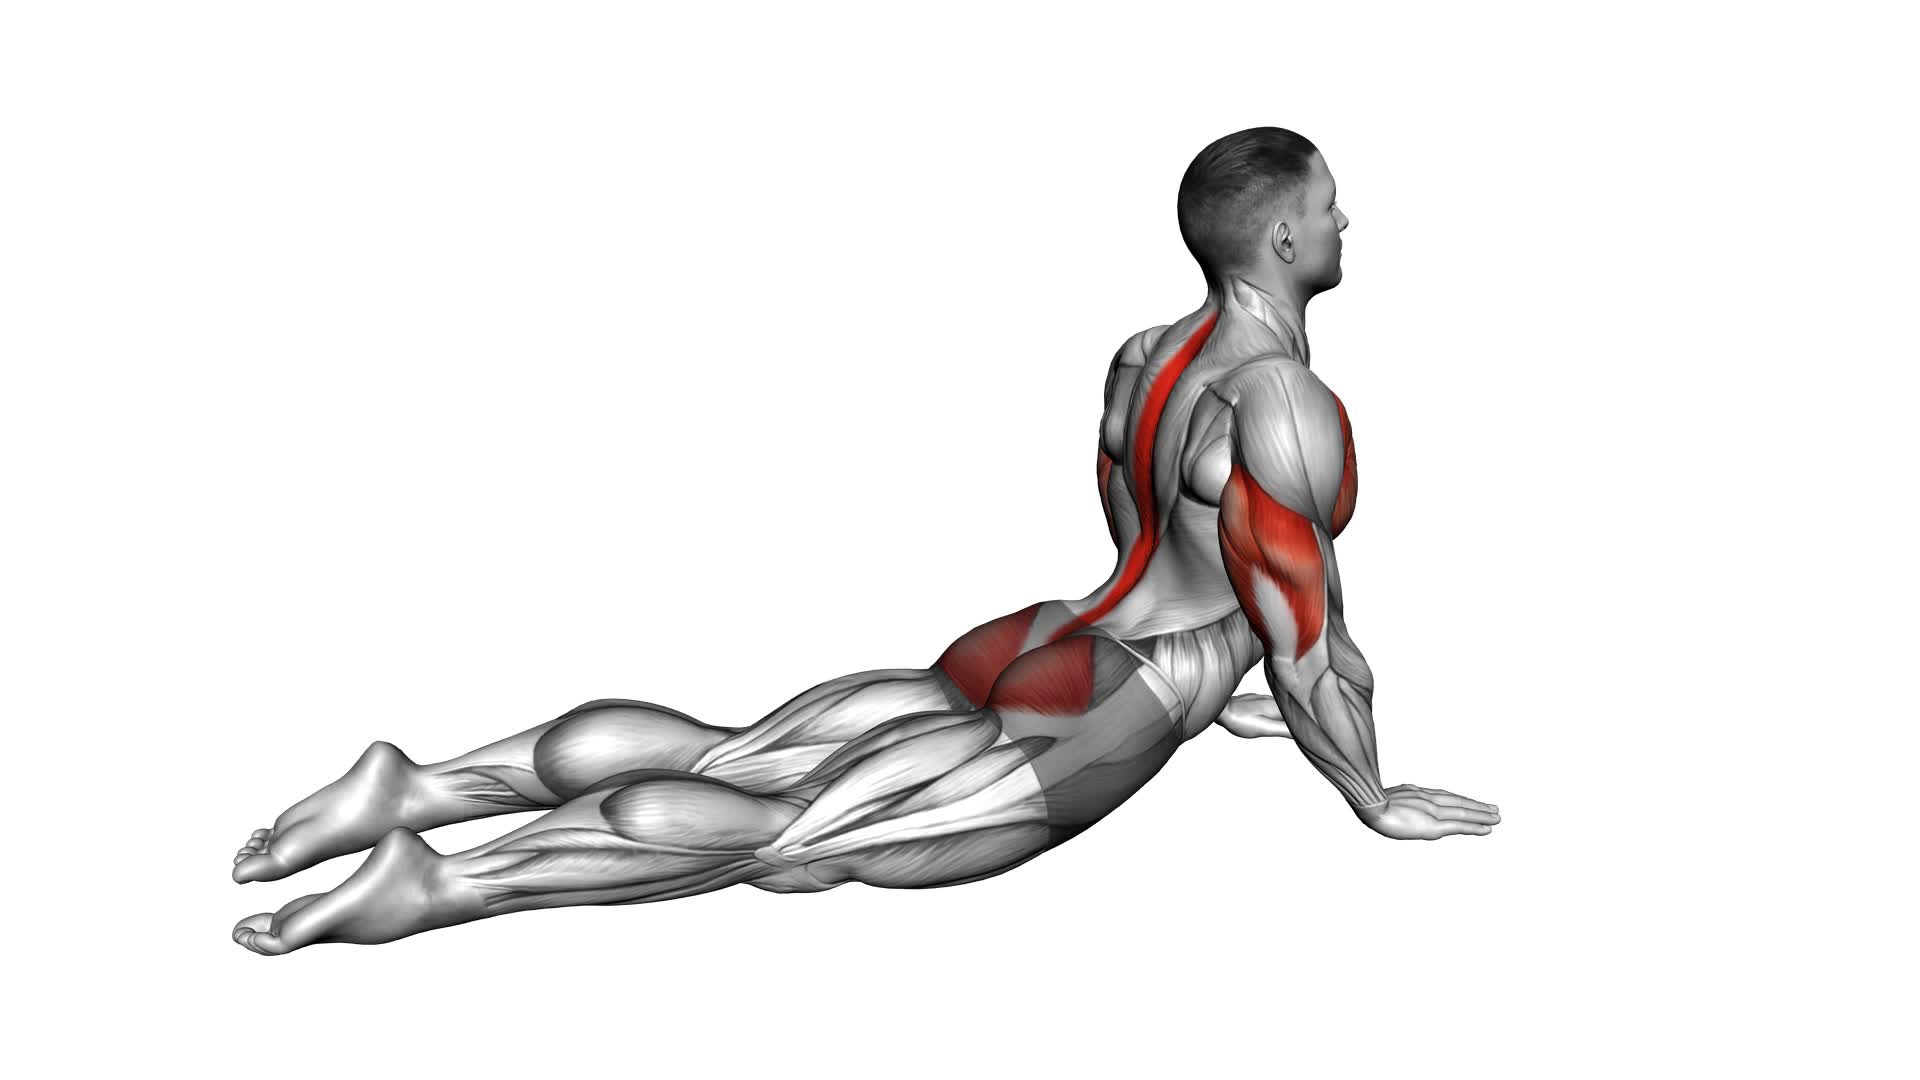 Seal Push-up - Video Exercise Guide & Tips